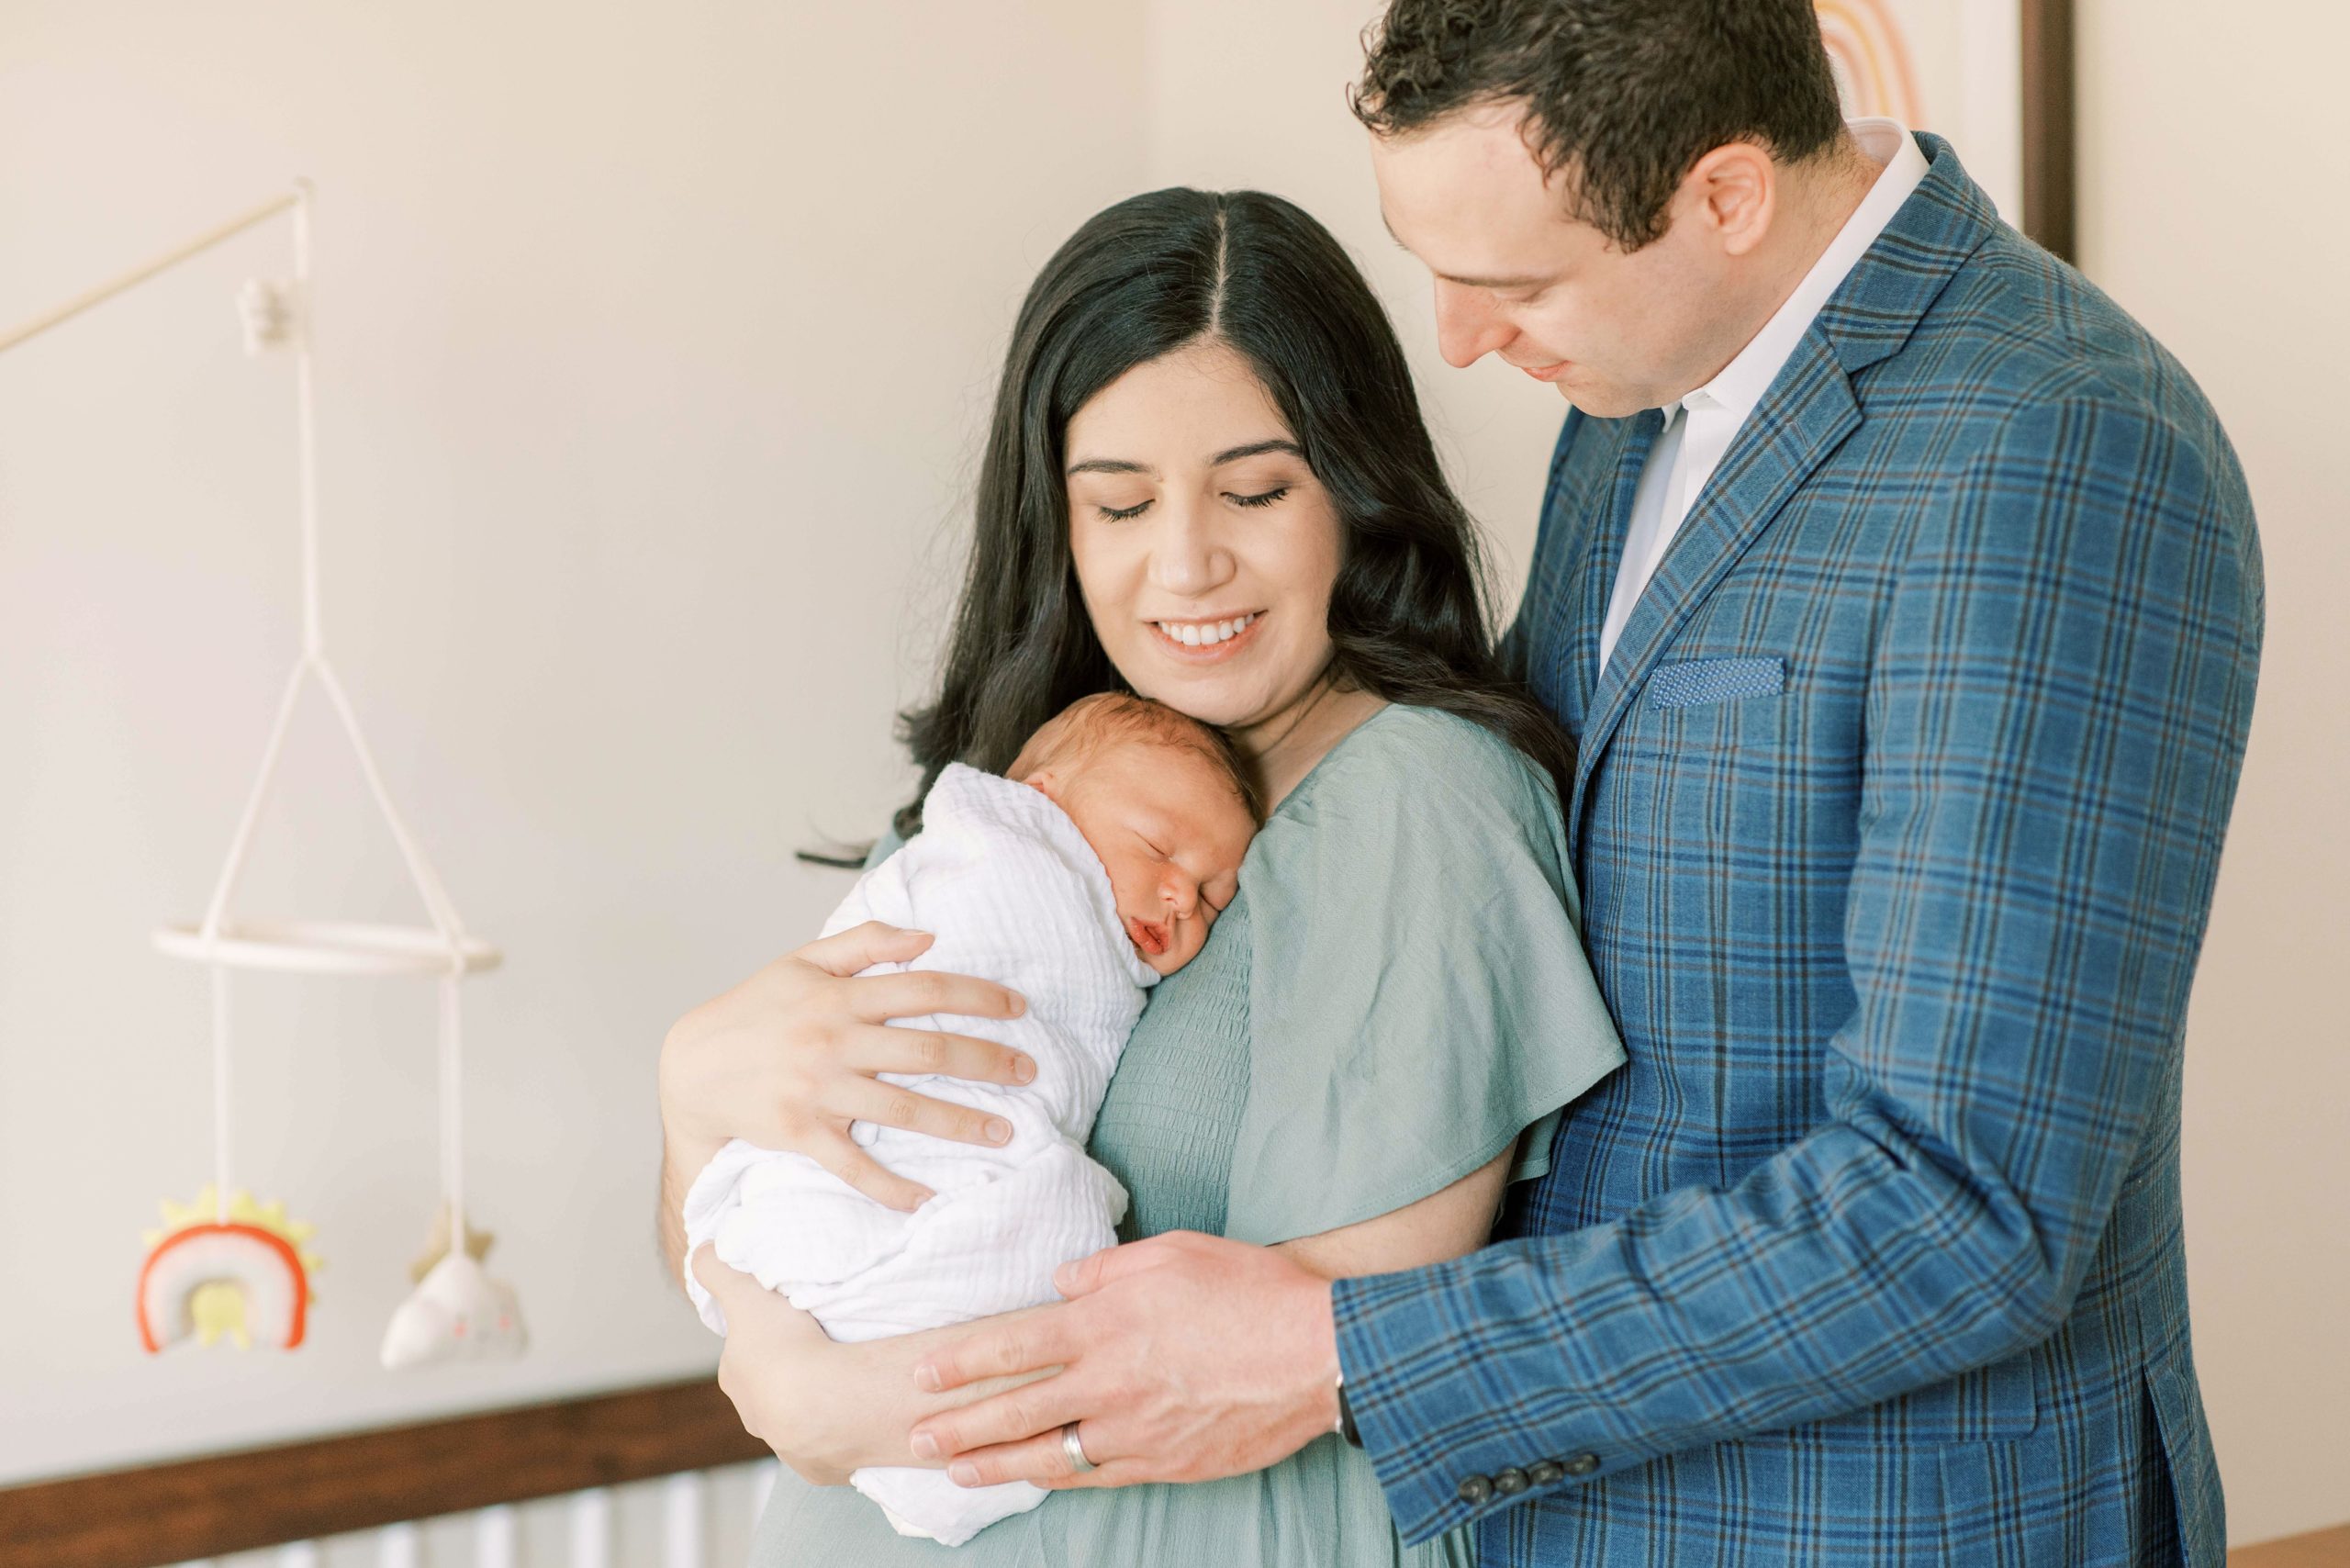 Washington, DC wedding photographer captures a newborn session for one of her past engagement and wedding couples.